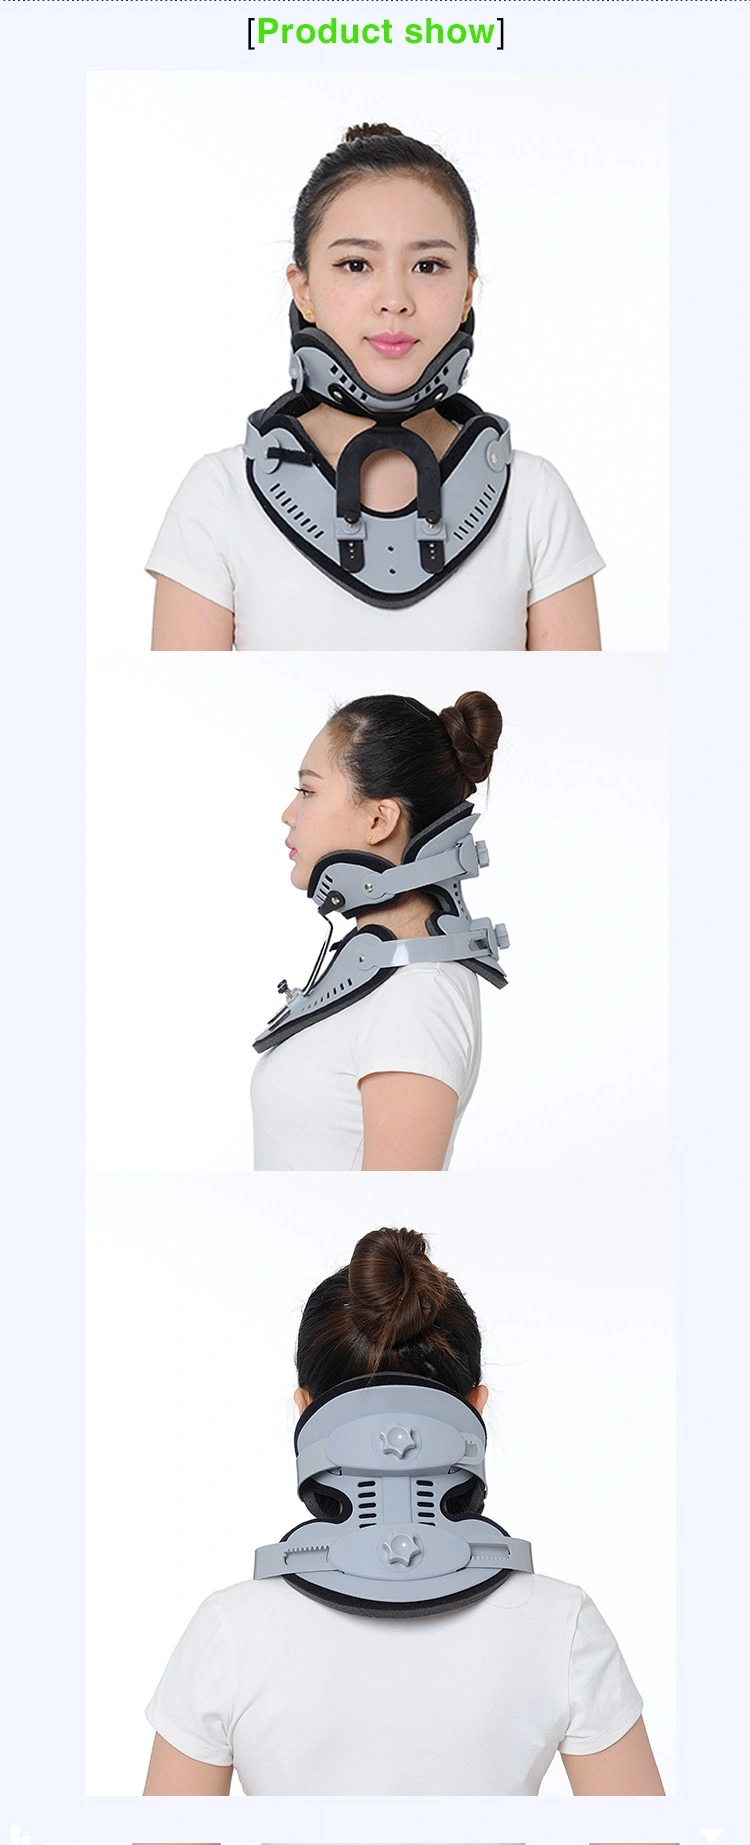 Cervical Collar Neck Brace Provides Neck Support and Assist Recovery From Neck Injury or Surgery